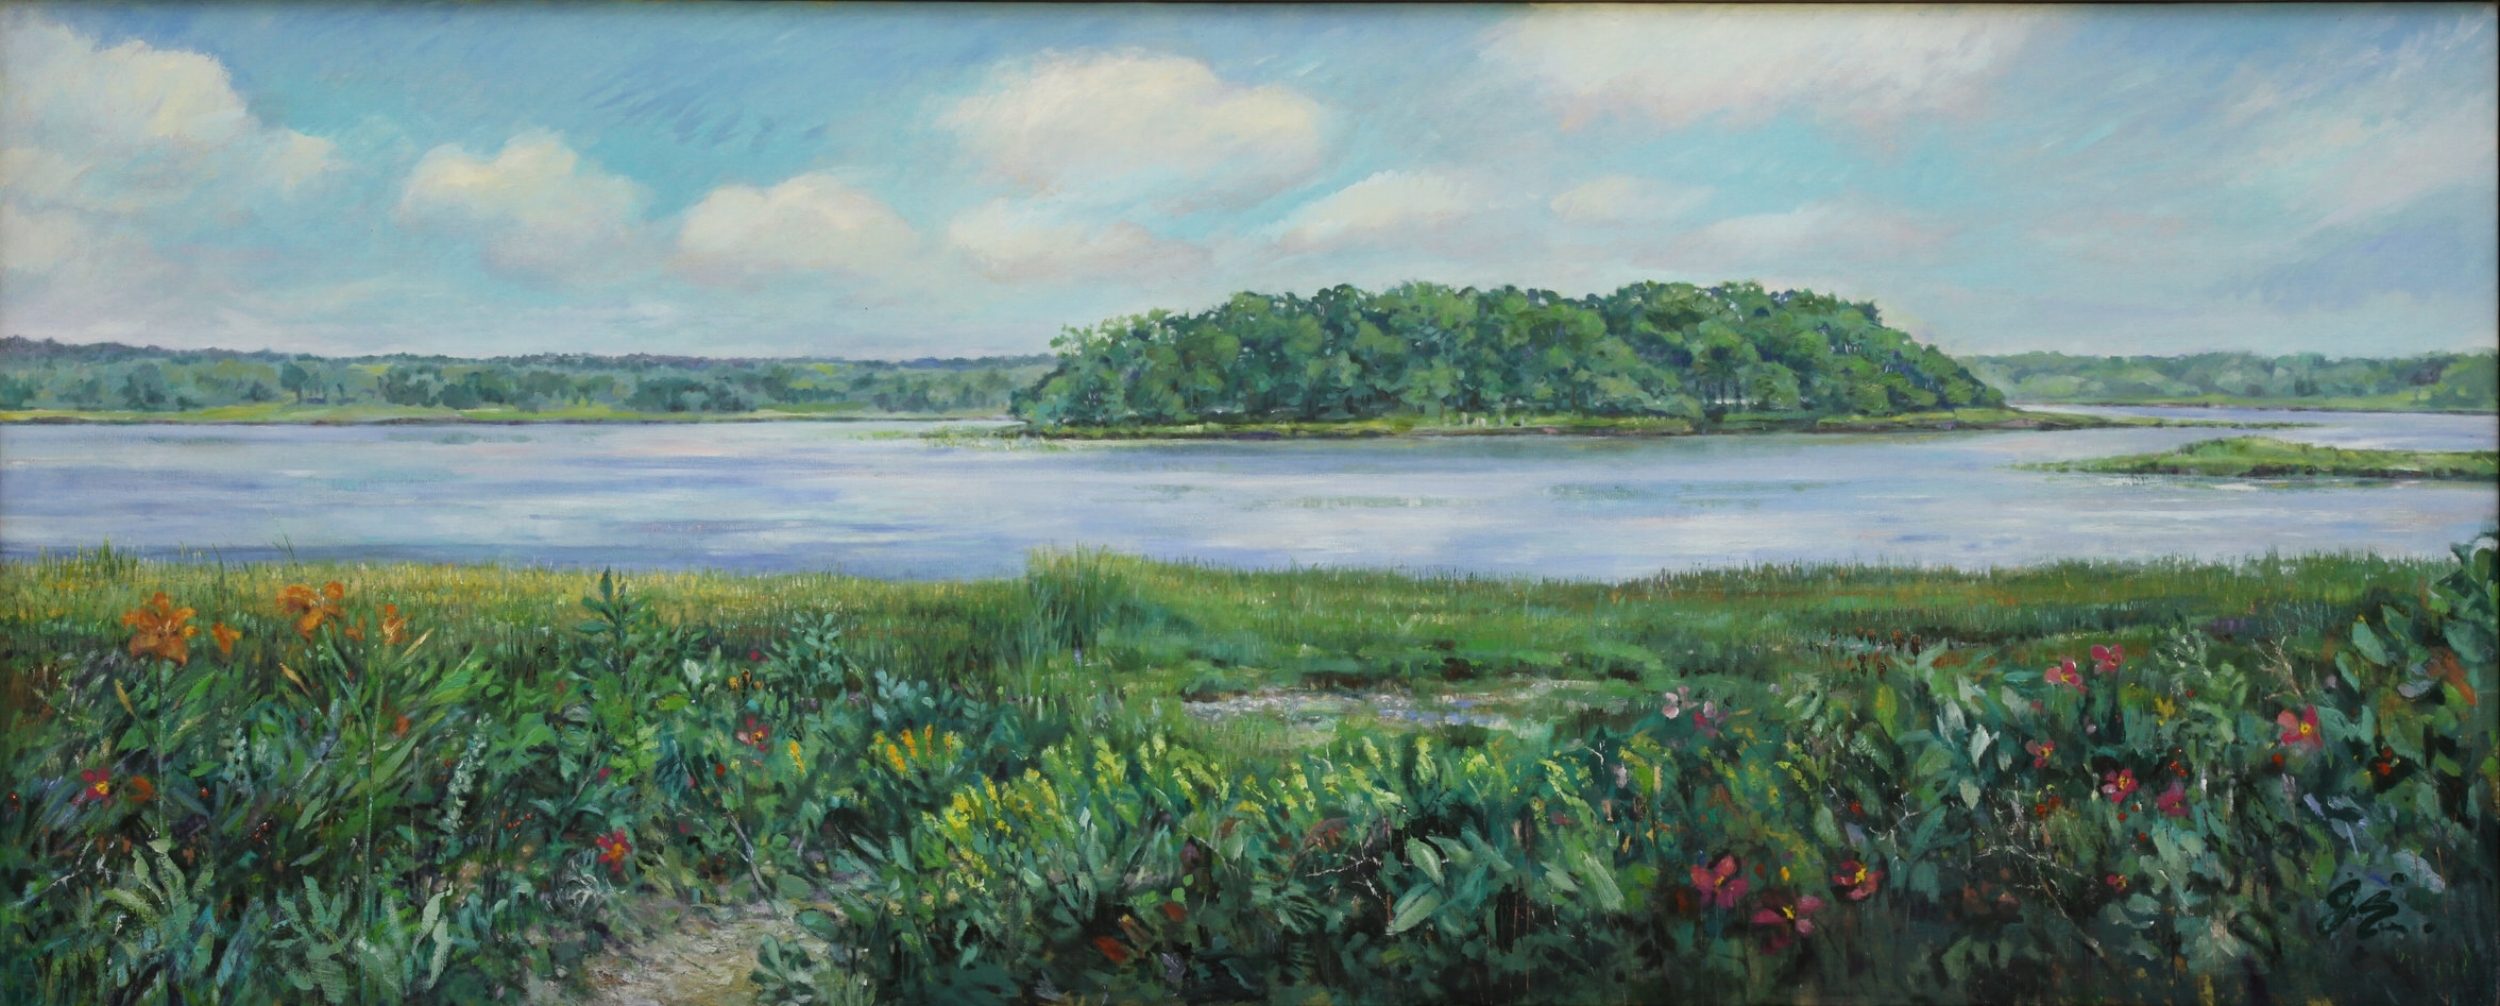 West Branch with View of Great Island, 2018 - SOLD